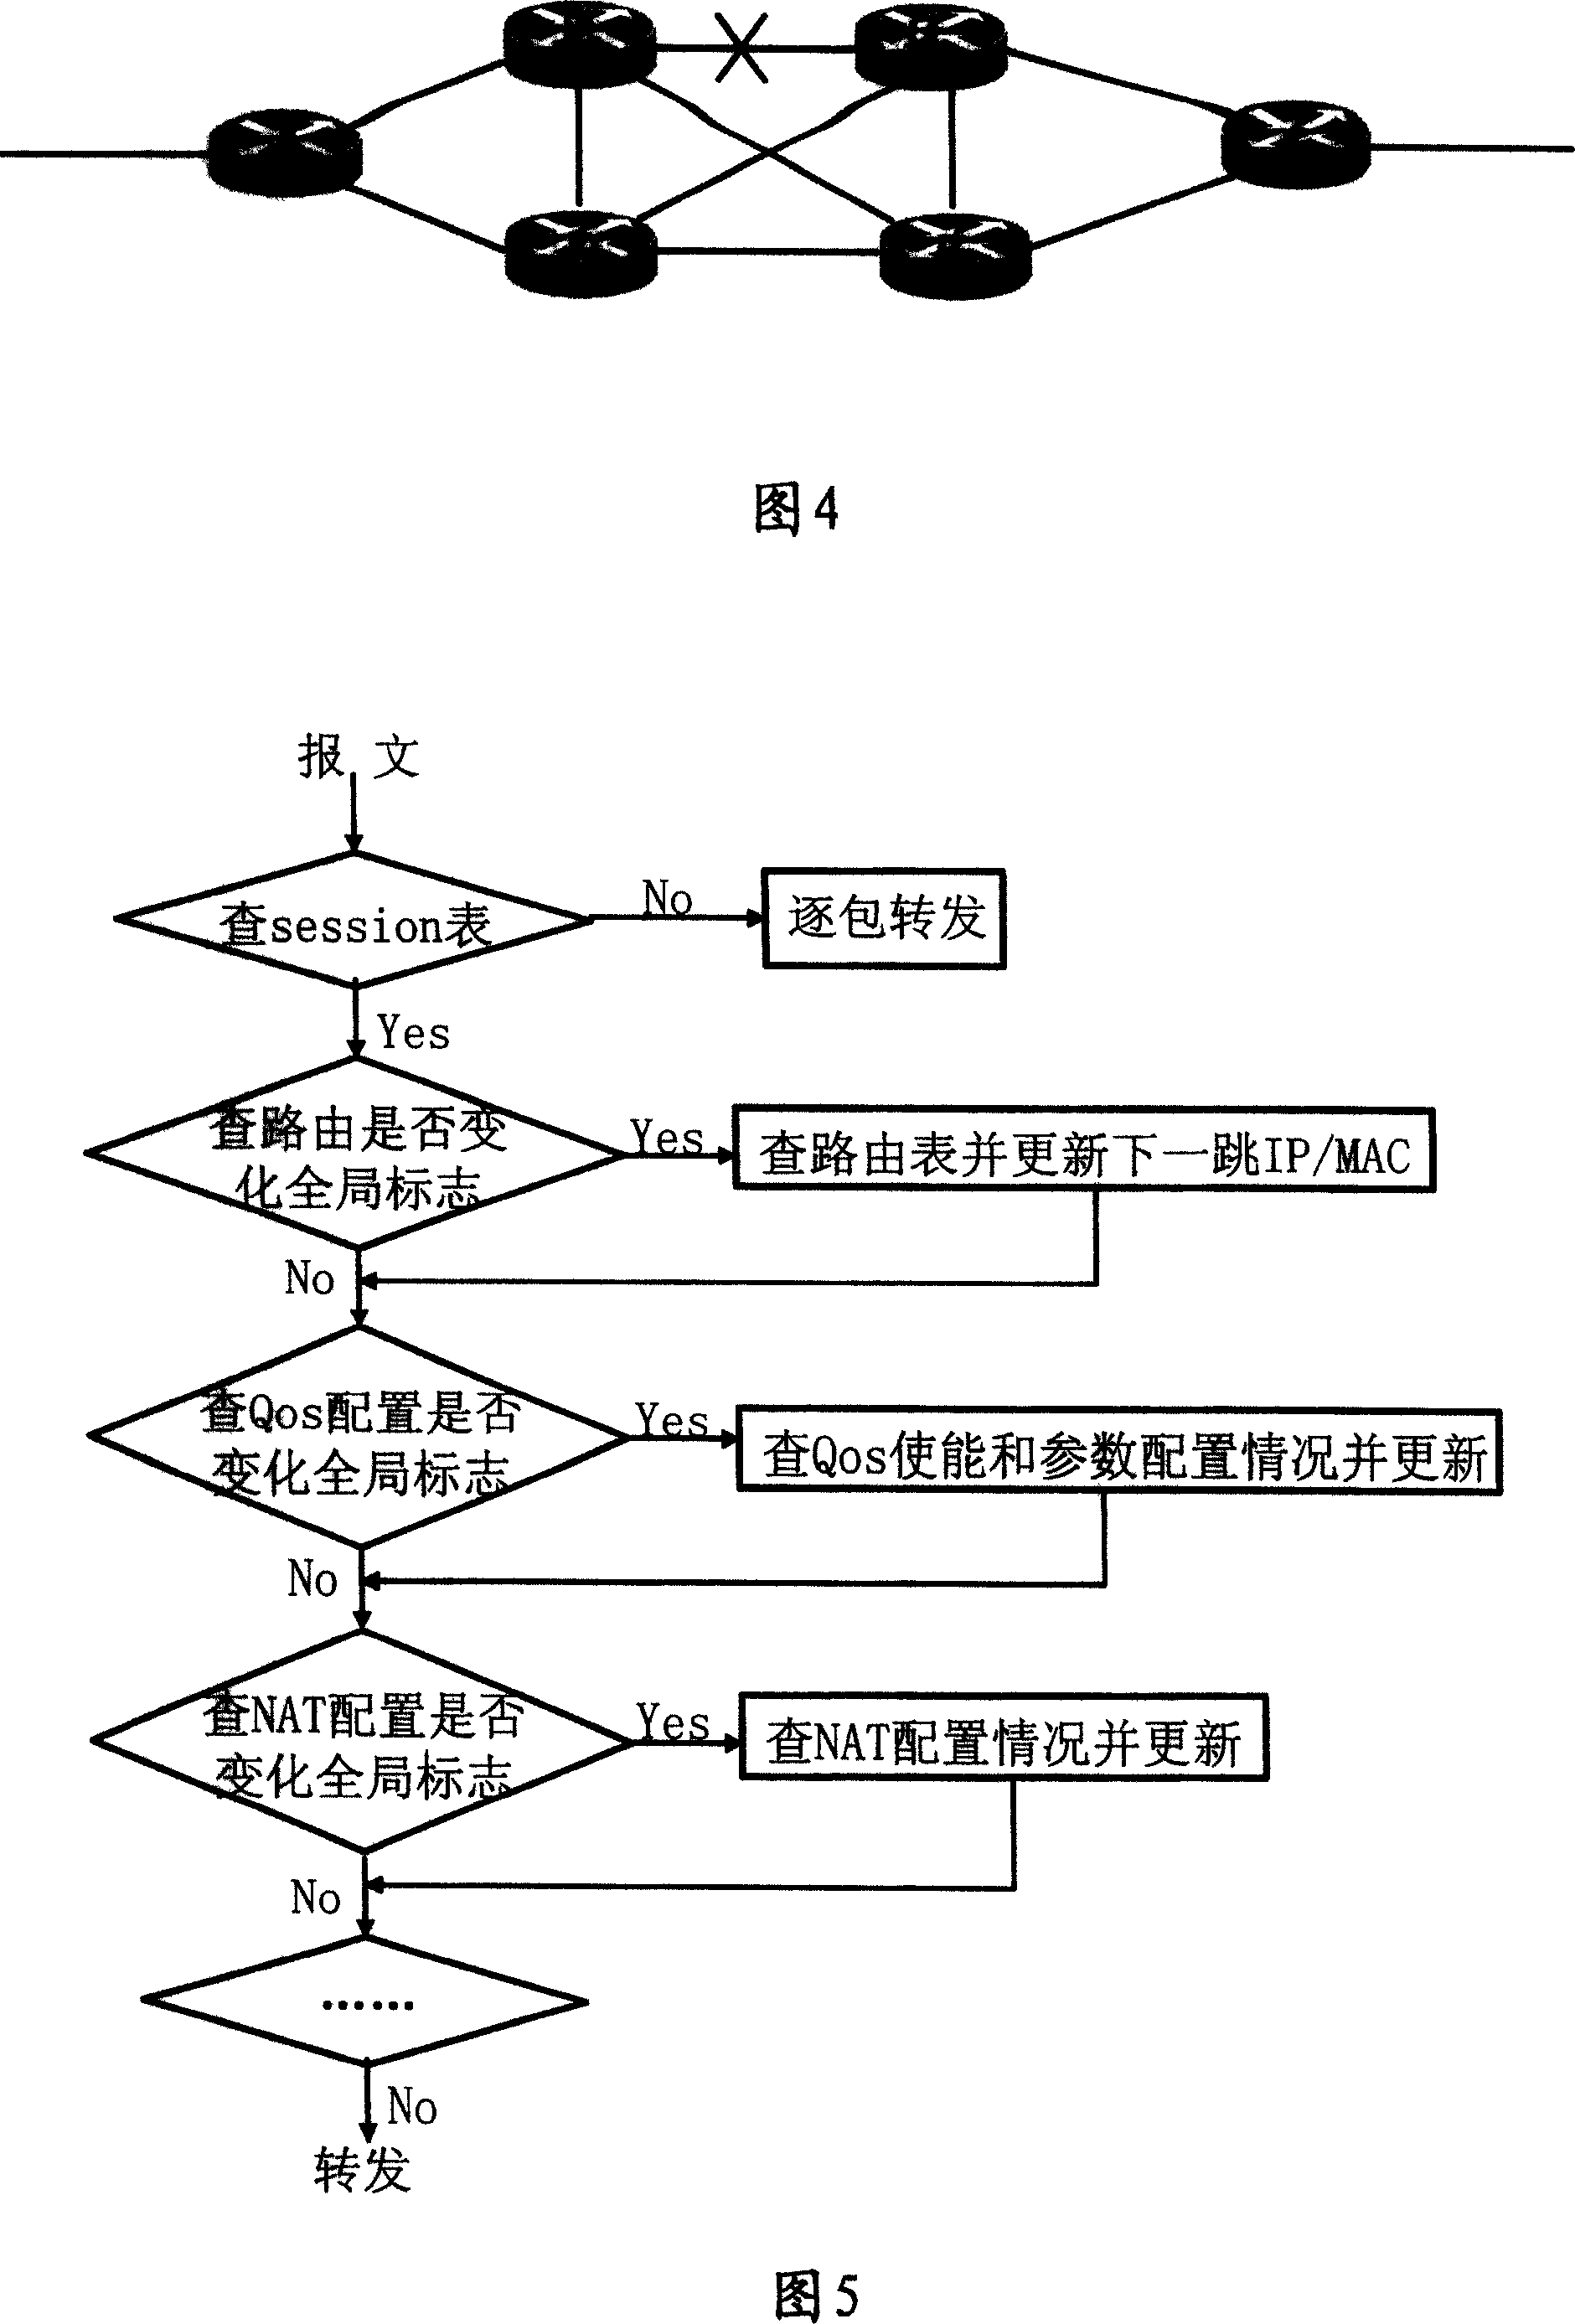 Method and device for updating stream forward table content based on the stream forward